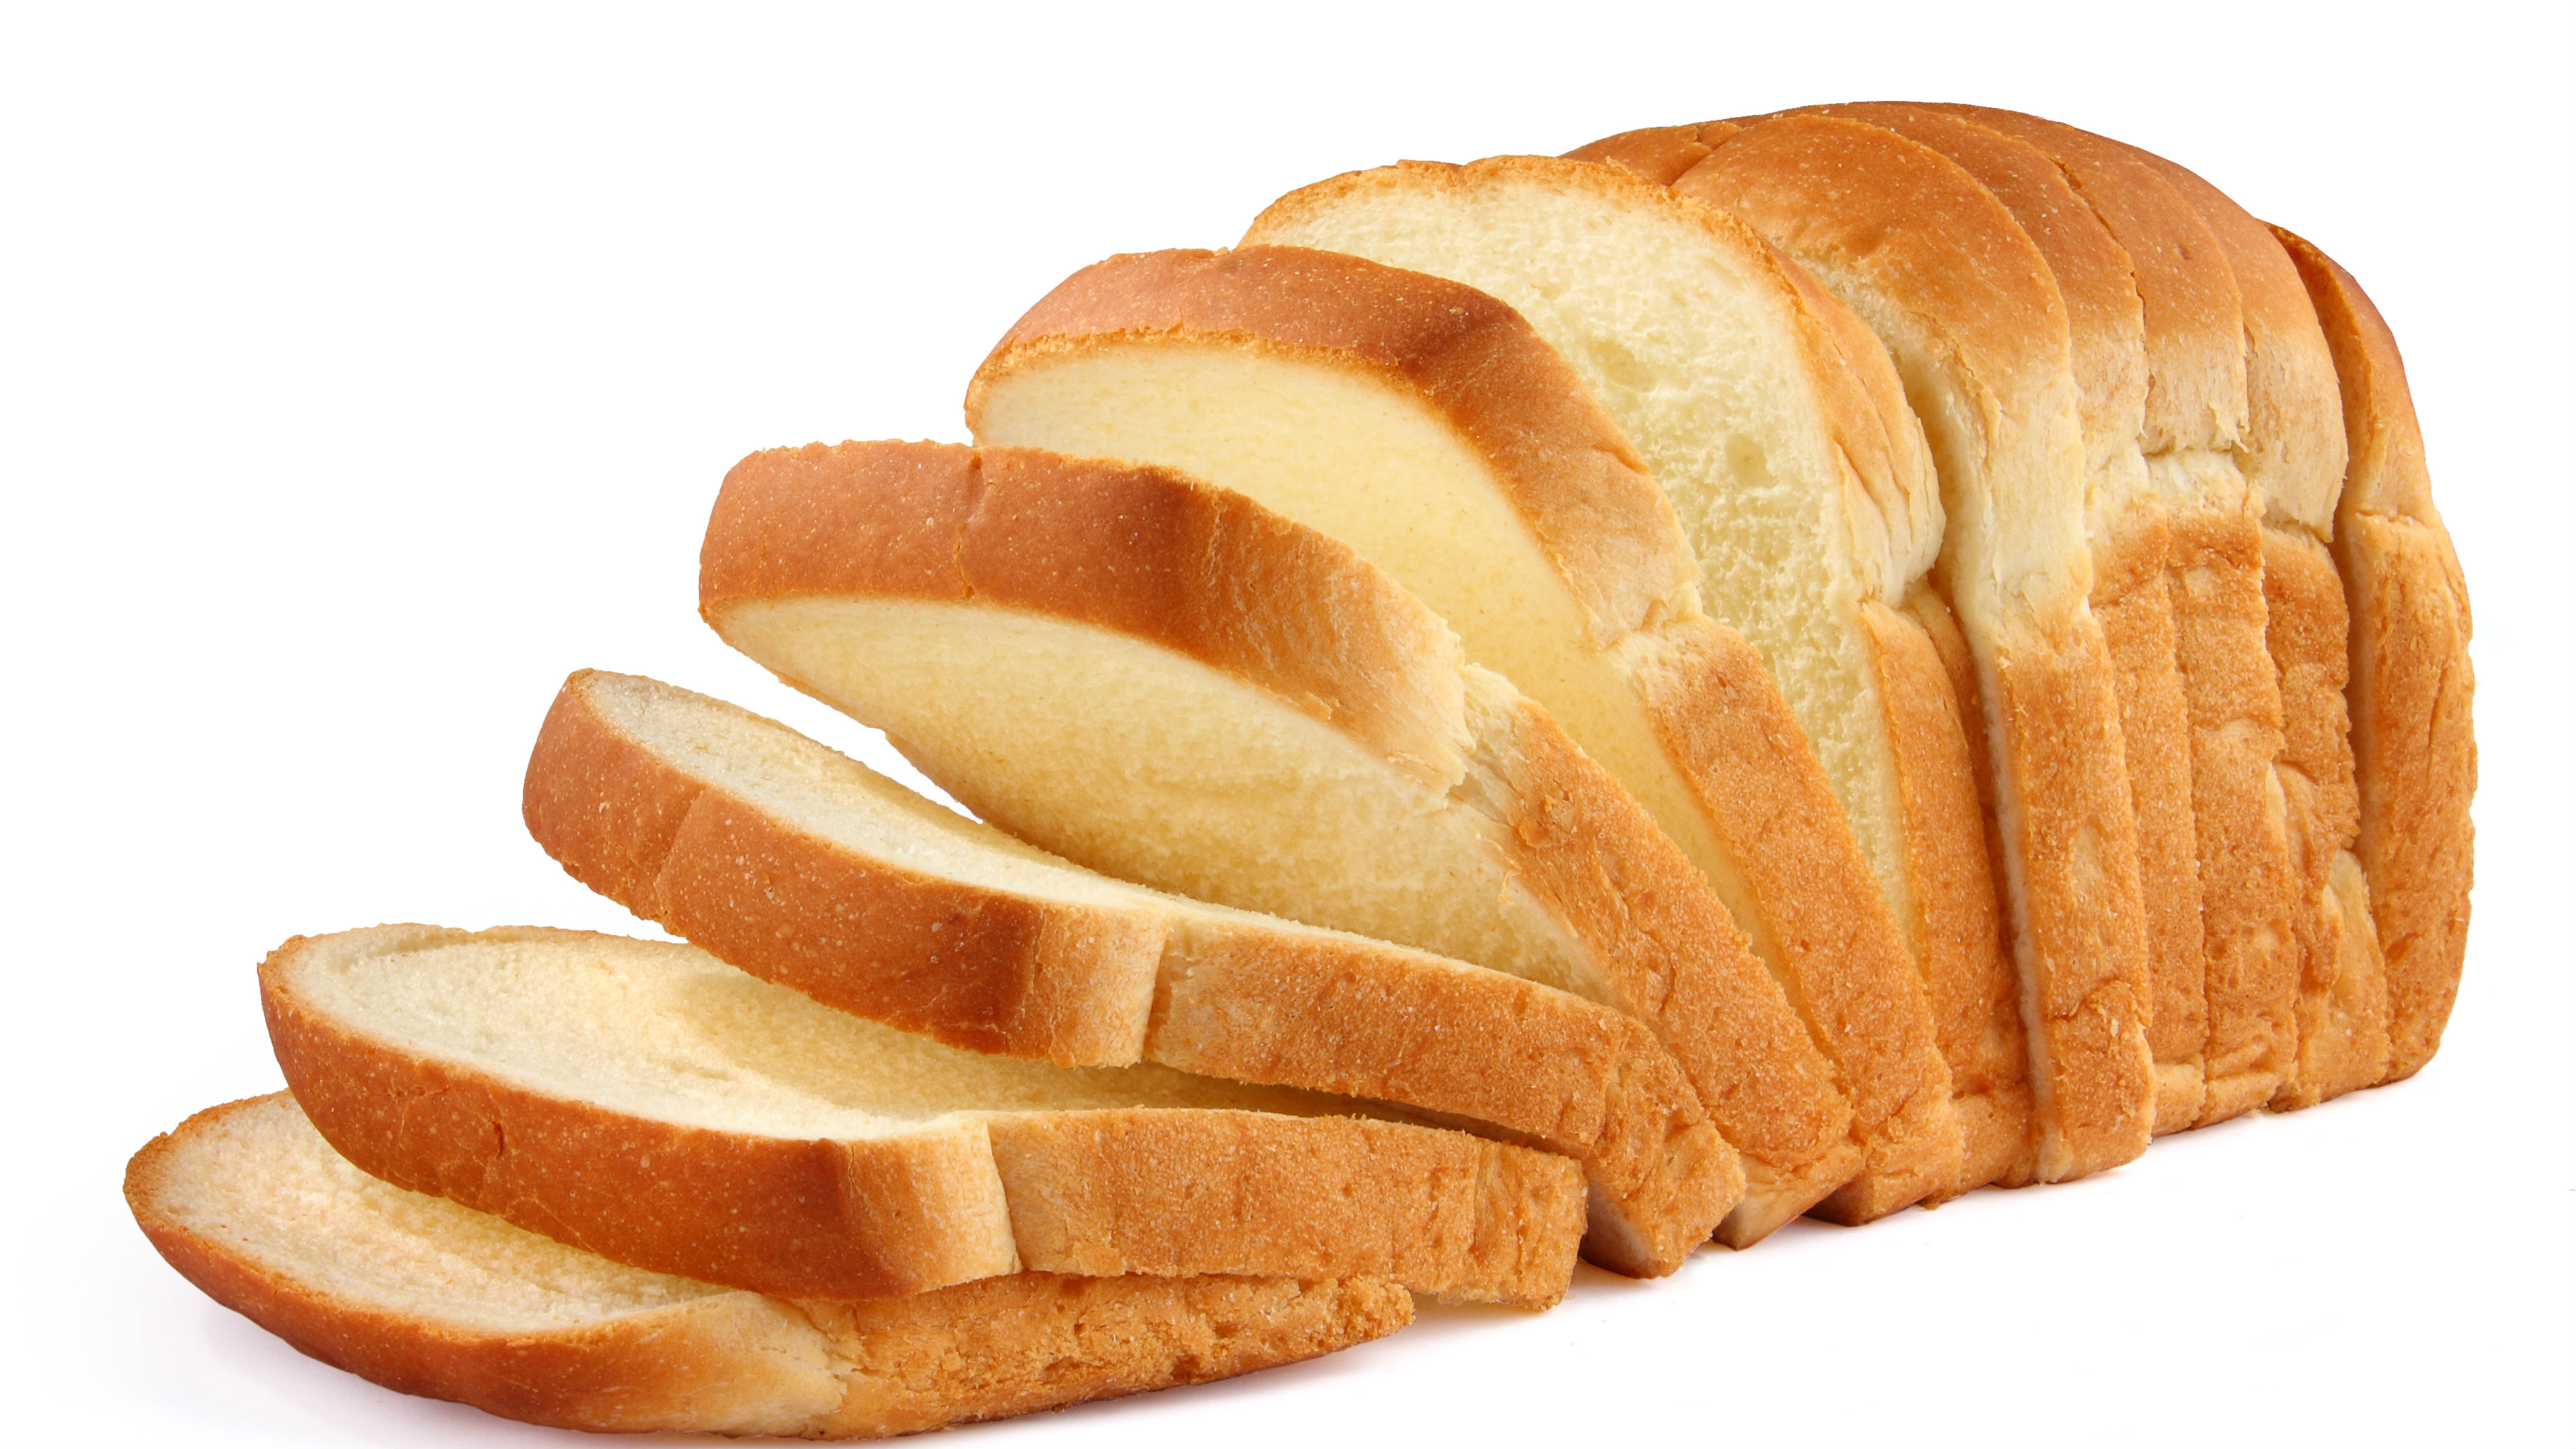 Images of Bread | 3719x2092